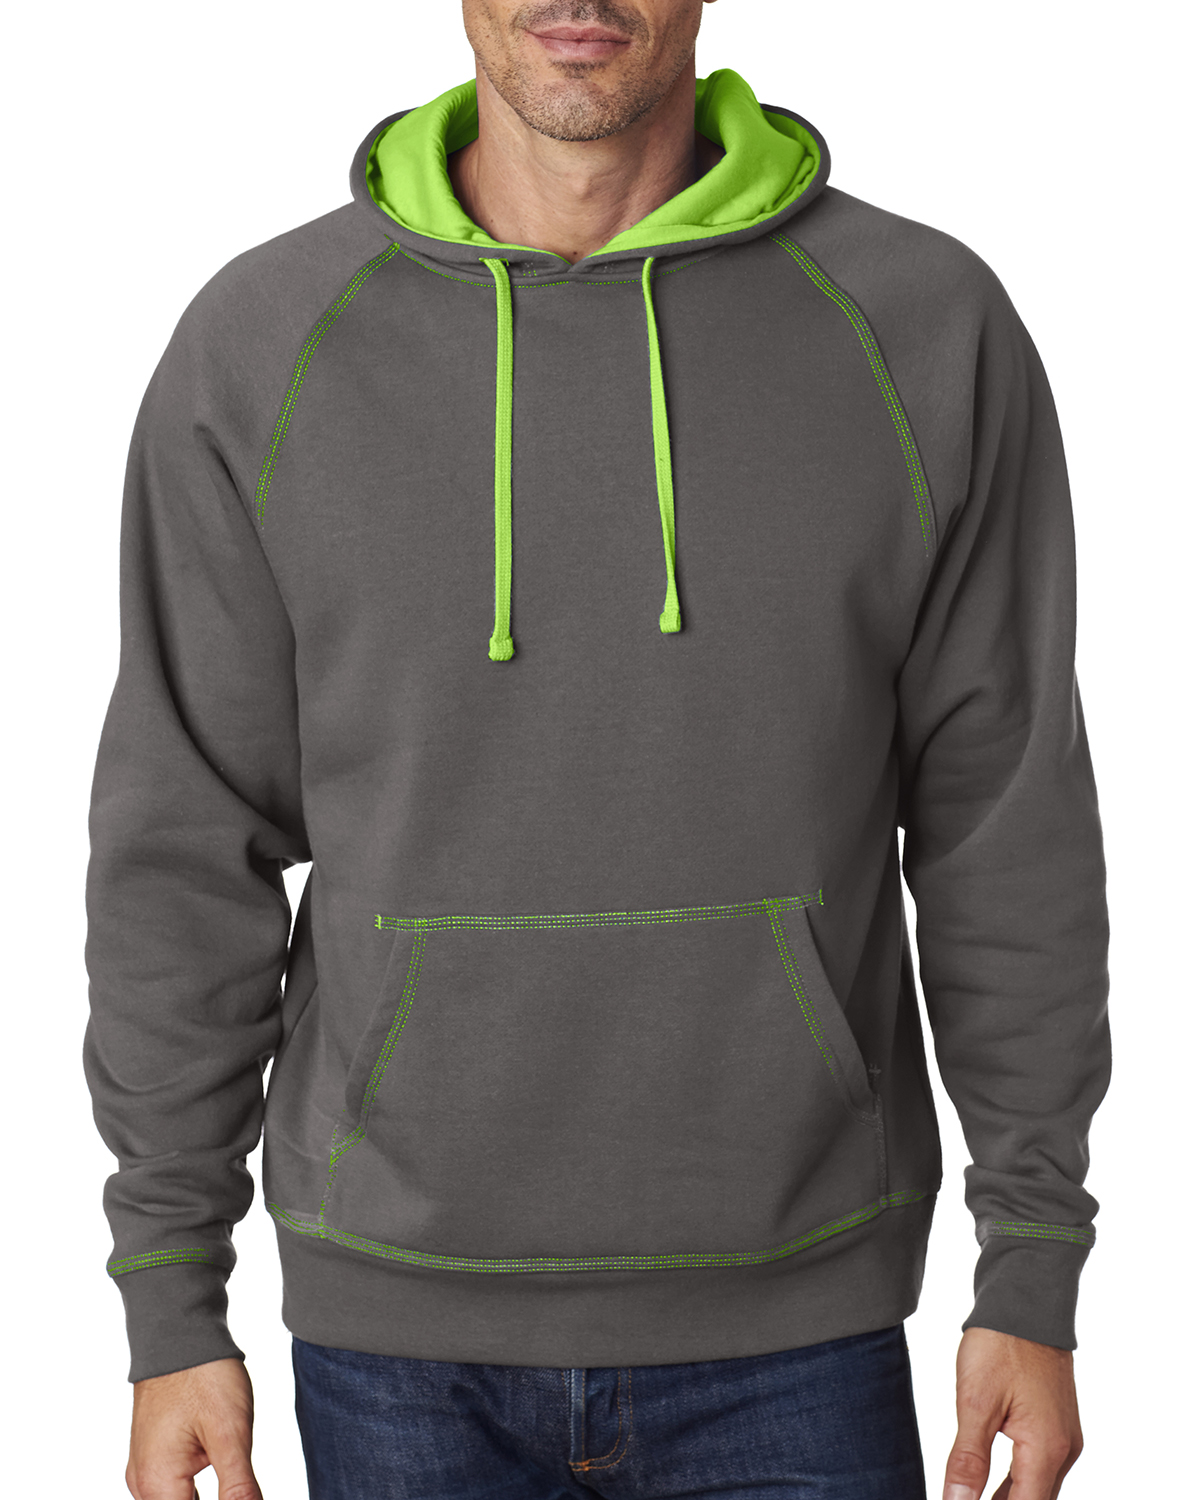 click to view DK GREY/ NEON GR